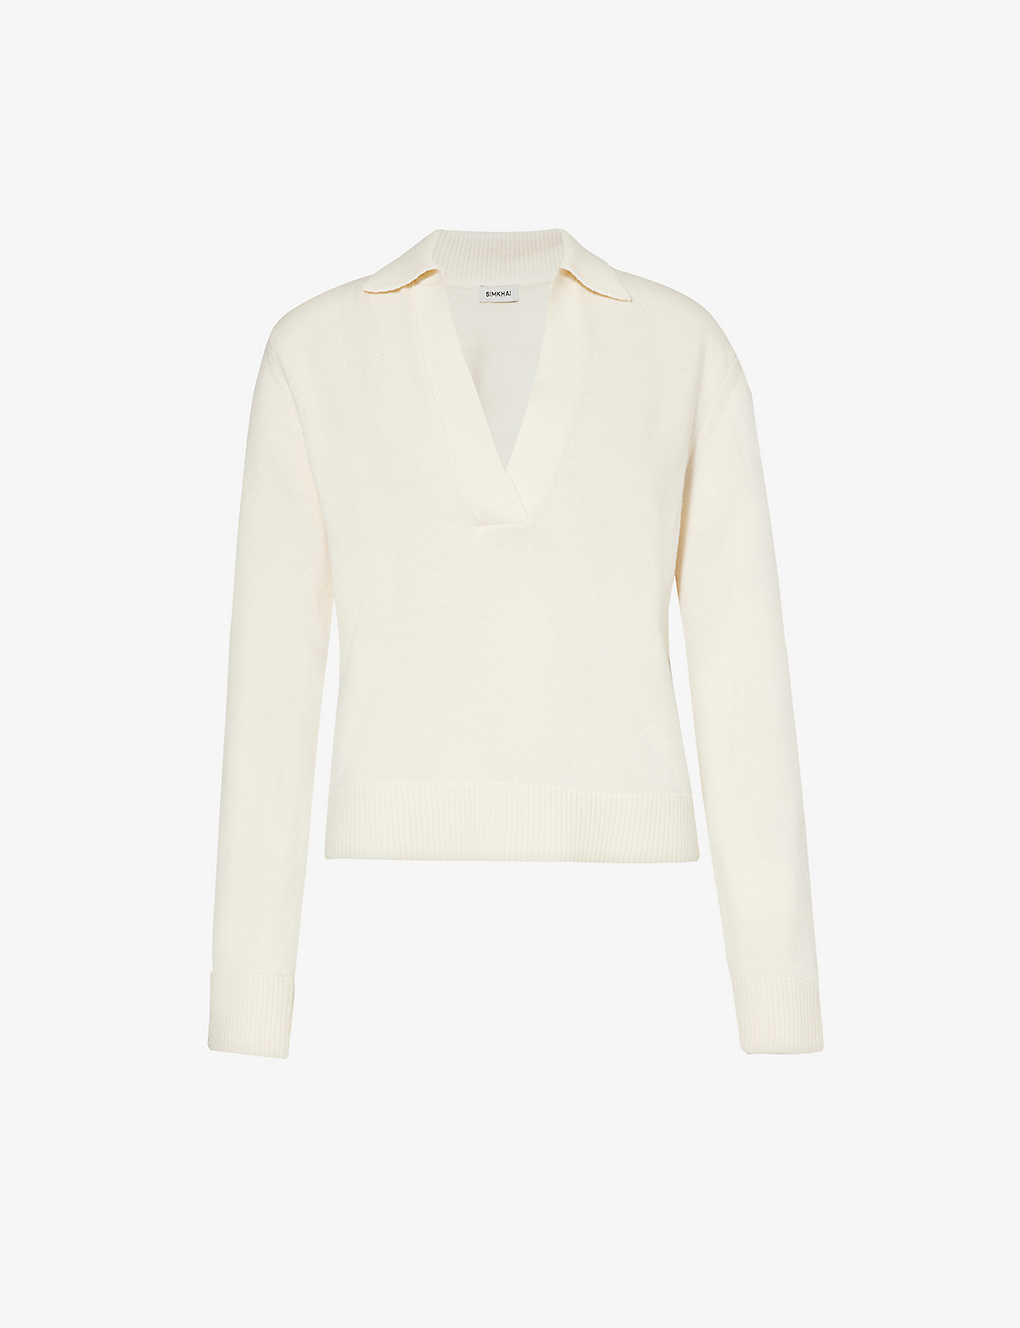 Simkhai Womens Ivory Open-collar Cotton And Cashmere-blend Jumper